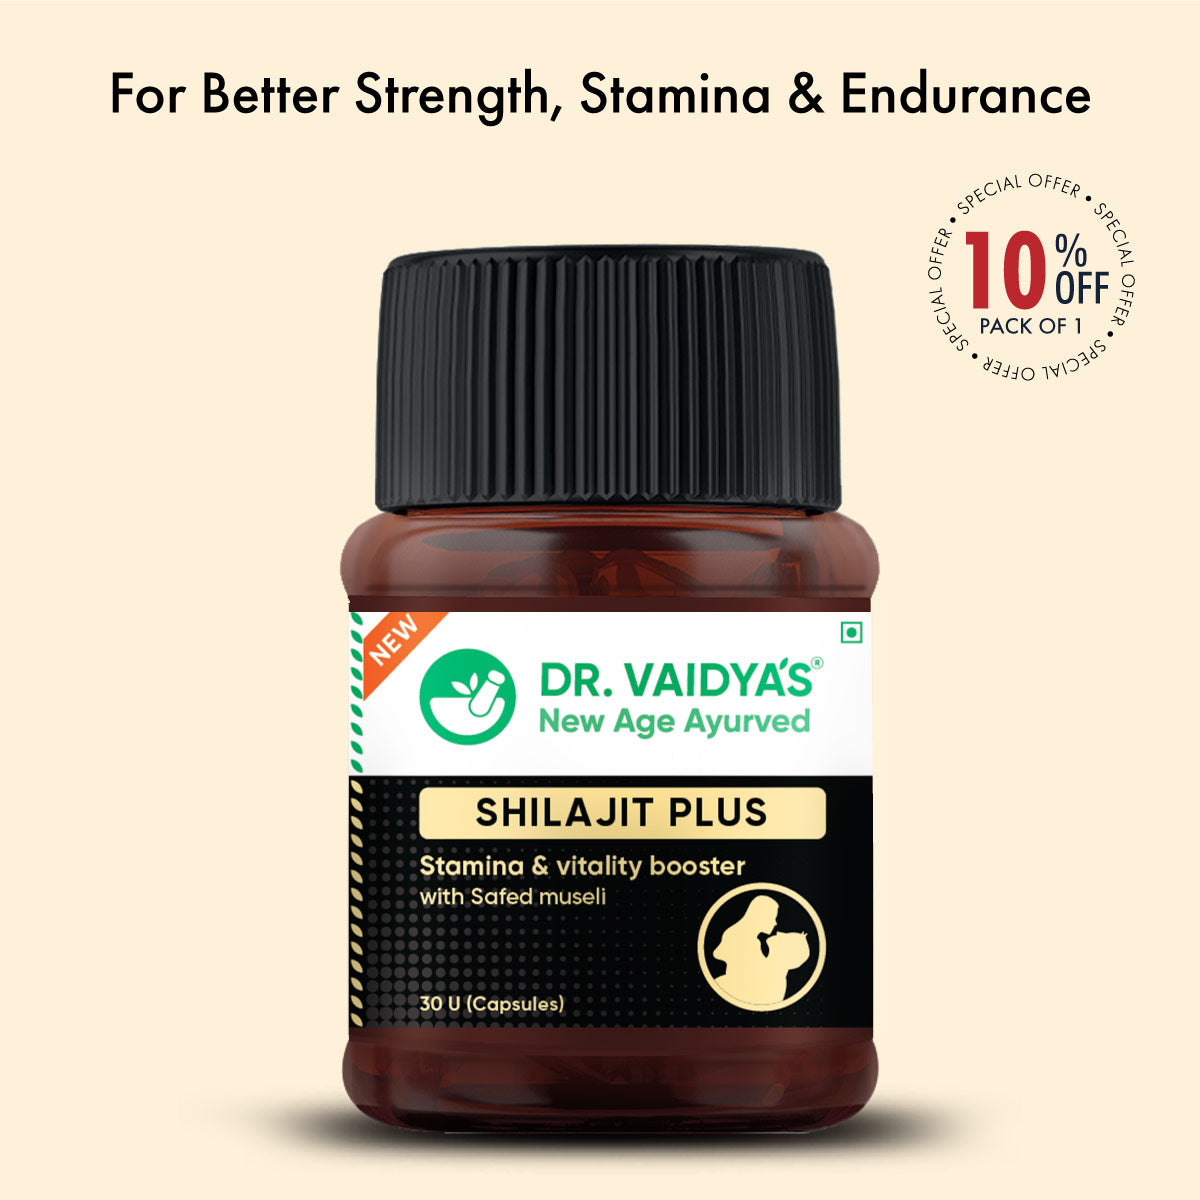 Shilajit Plus: More Strength & Stamina To Your Performance